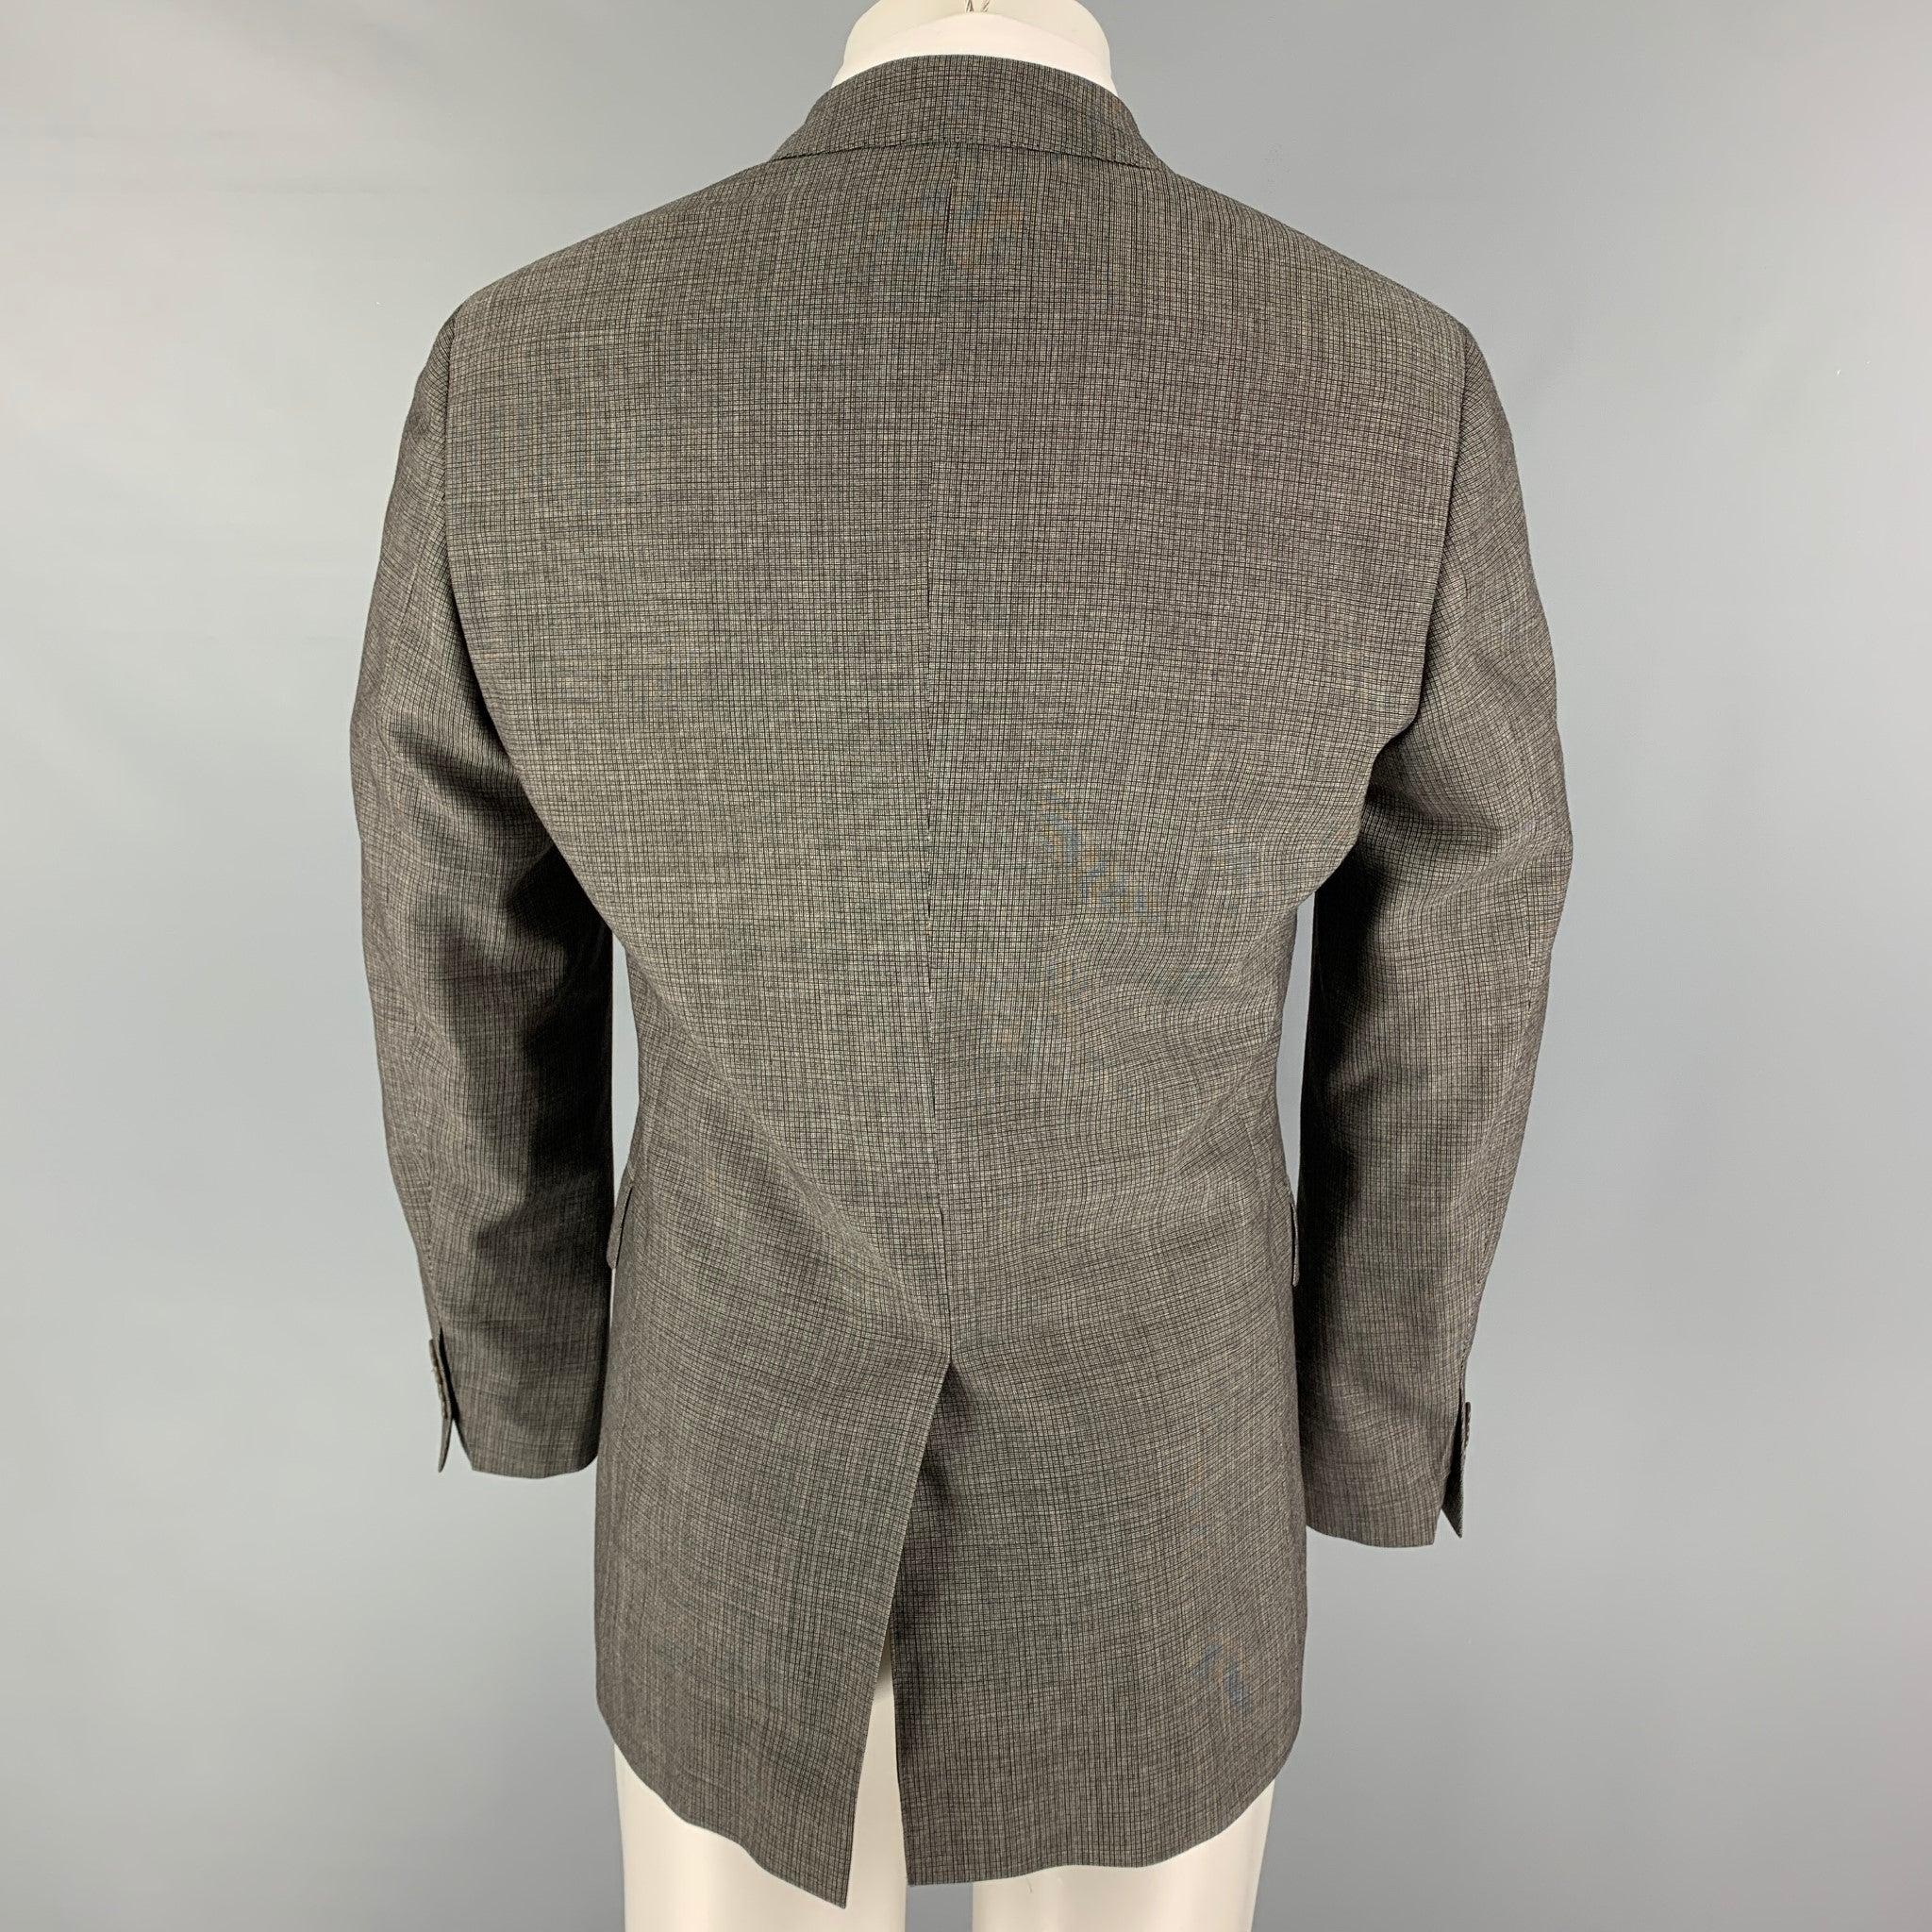 JOHN VARVATOS Size 40 Grey Black Grid Wool Notch Lapel Sport Coat In Good Condition For Sale In San Francisco, CA